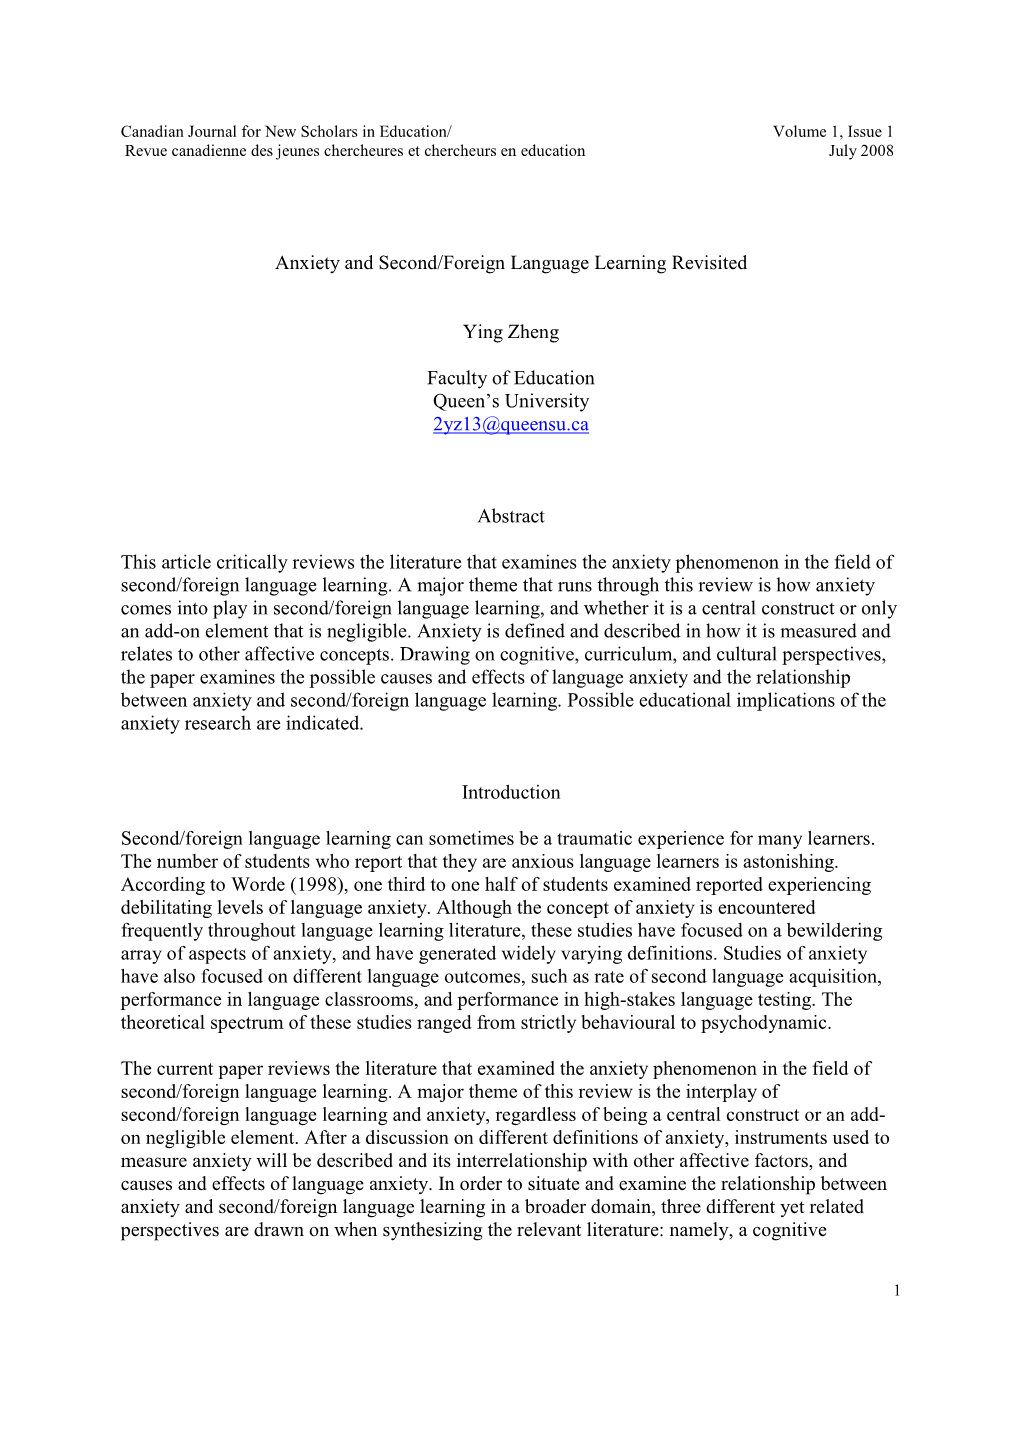 Anxiety and Second/Foreign Language Learning Revisited Ying